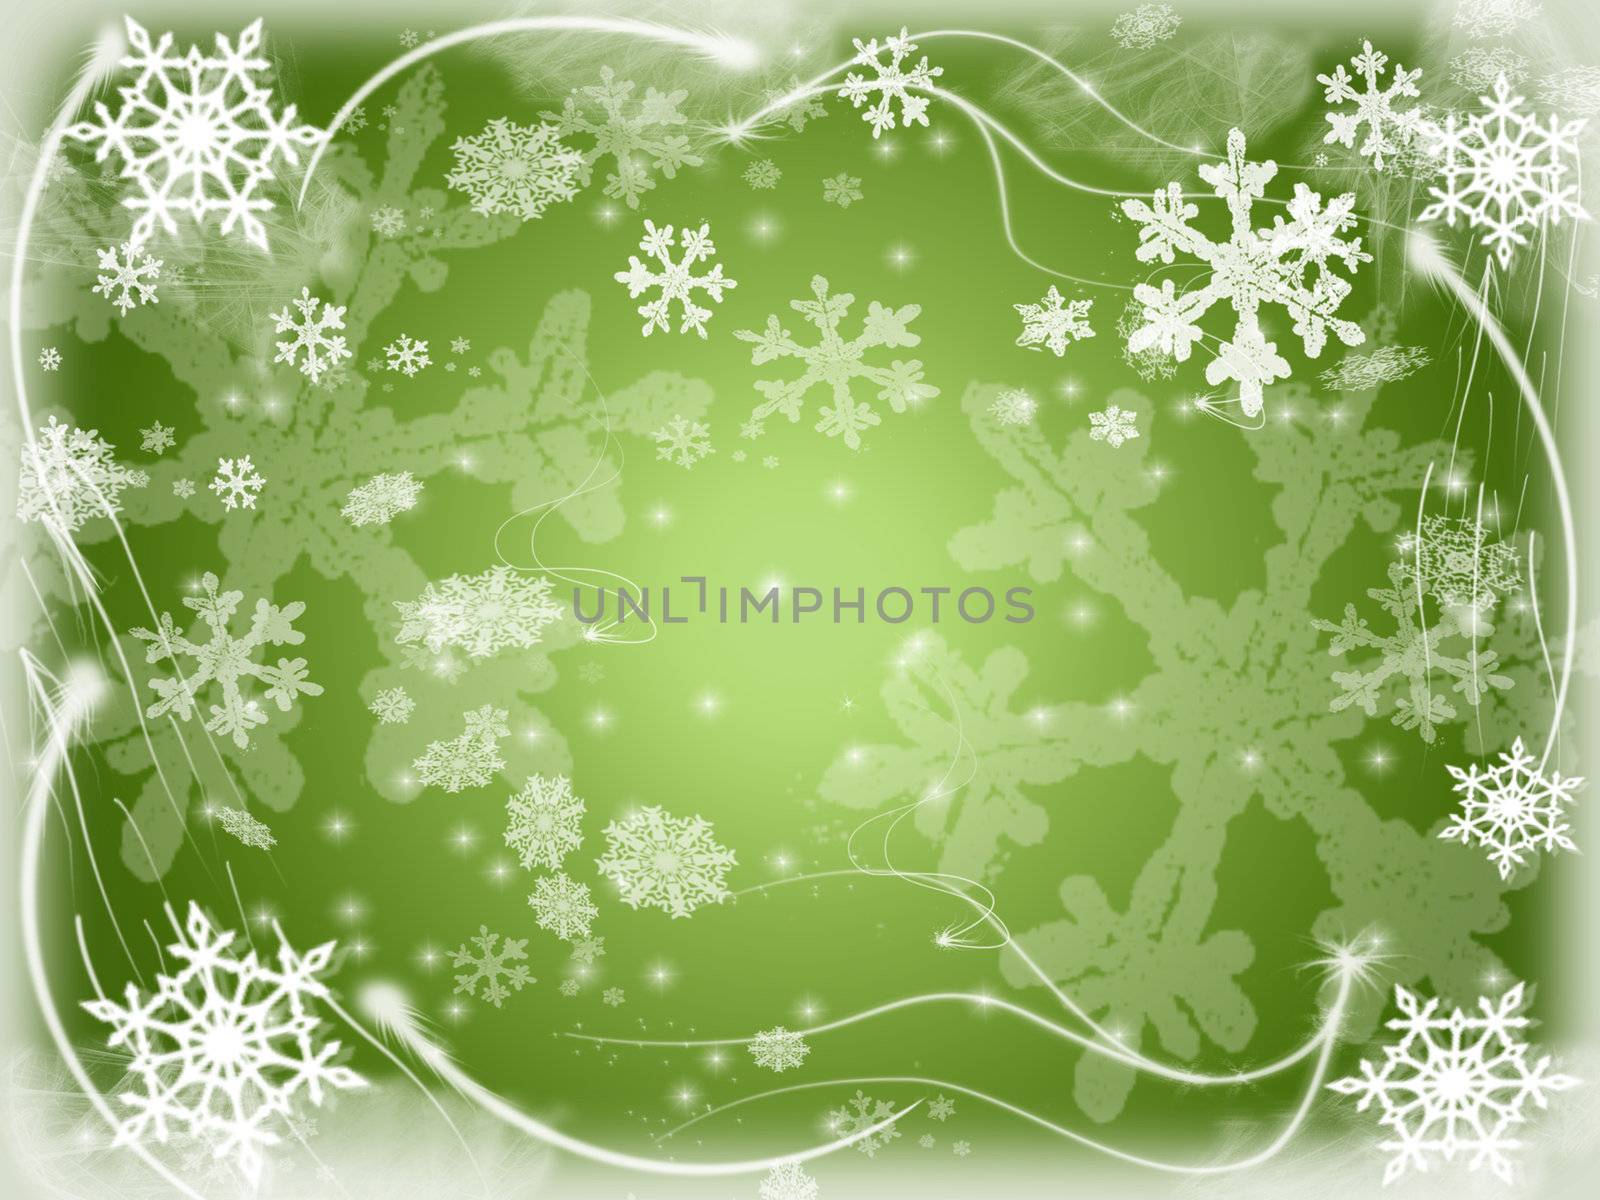 white snowflakes over green background with feather corners